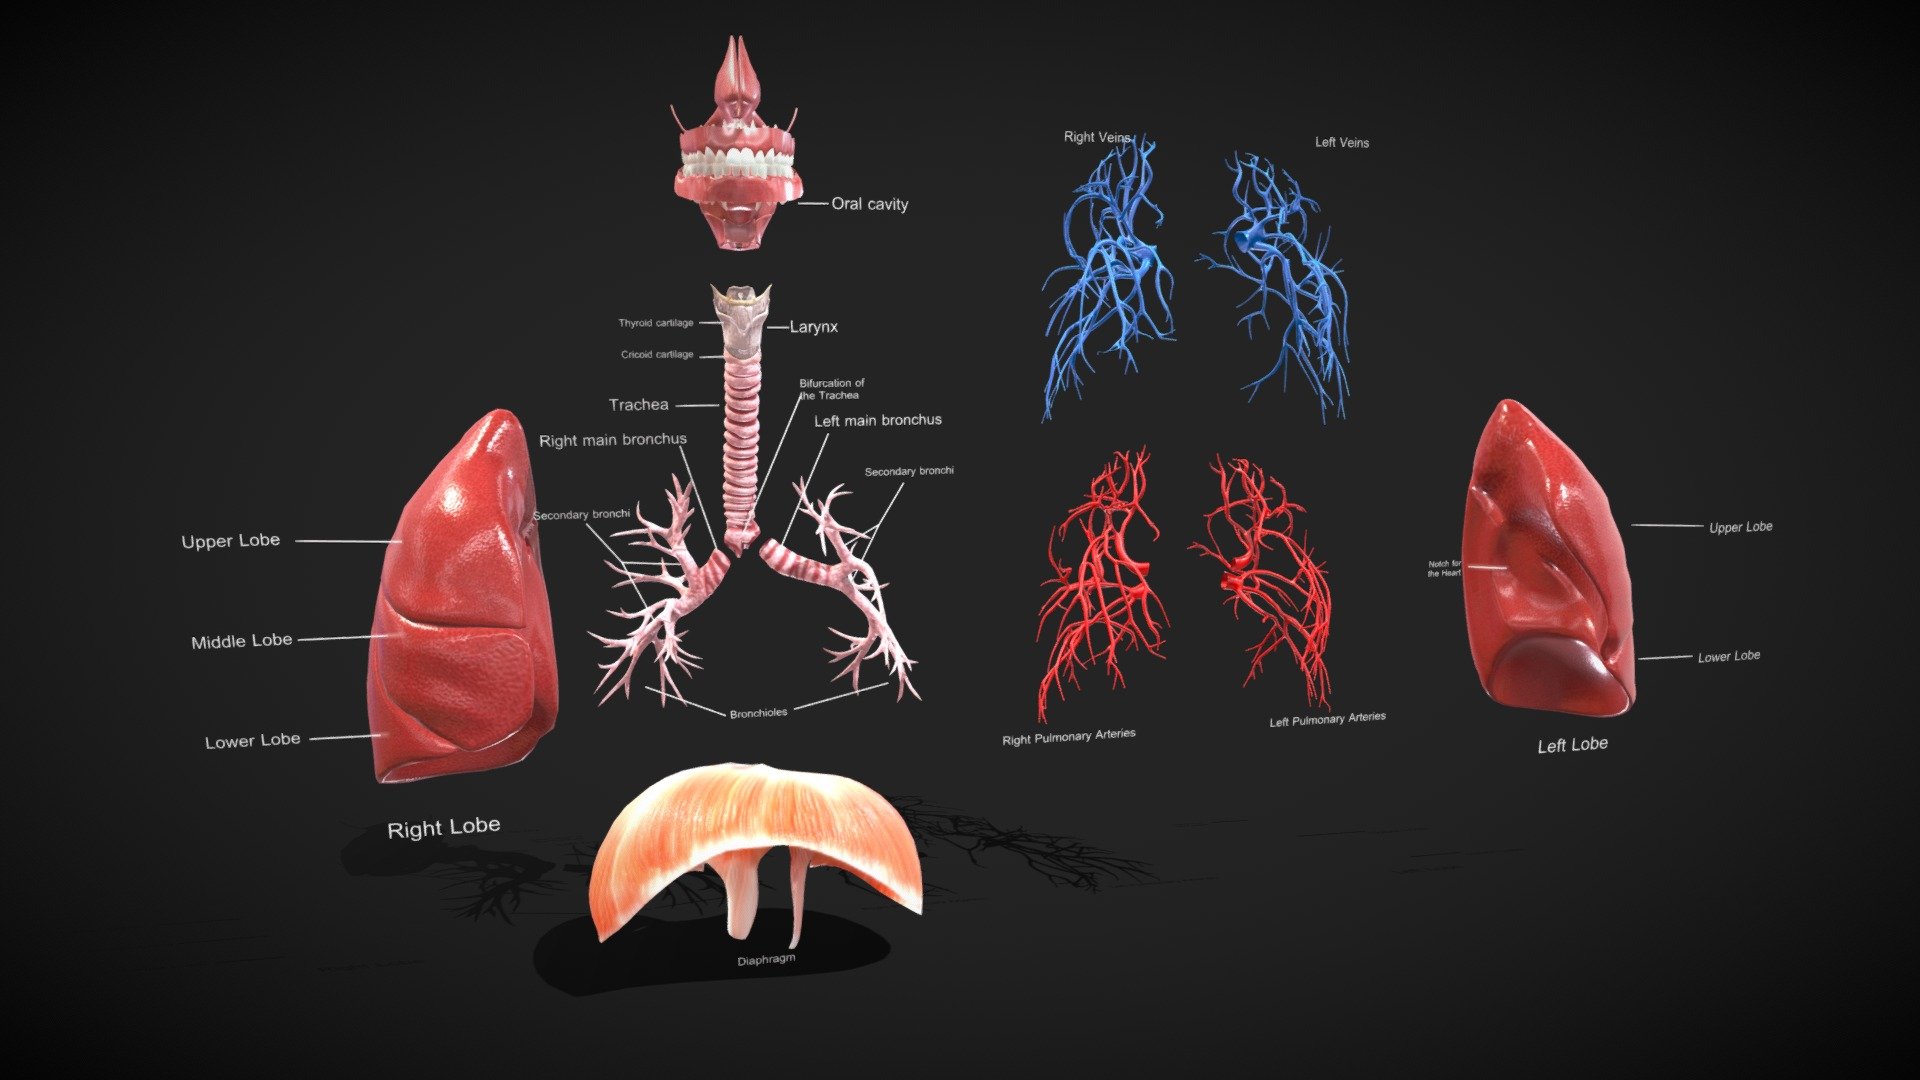 Respiratory System




No errors or missing files

High-quality polygonal model

No N-GONS Faces

This model is created in polygon quad &amp; tri with good edge flow

Correctly scaled accurate representation of the original object.

The scene is well arranged (proper layer and group)

Objects, materials, and textures are named.

Units in centimeters




Lungs ----Polys: 15386-----Verts:15721

Larynx with Trachea ----Polys: 19902----Verts: 19982

Diaphragm ----Polys: 1294-----Verts: 1289

Veins and arteries ----Polys: 13282----Verts: 13428

Oral cavity ----Polys: 13278----Verts:13632

Teeth ----Polys: 11872----Verts:11882

Nasal cavity ----Polys: 1990----Verts: 2034

Tongue ----Polys: 559 ----Verts: 561

Respirator system




Polys: 76720

Verts: 77664

Dimension: 23x19x53

Formats:




3Ds Max 2014 _V-Ray

Maya 2016

Cinema 4D R15

FBX

OBJ

Diffuse Base - Glossiness- Normal- Specular- AO – Roughness- Metallic-Opacity - Respirator system Anatomy - Buy Royalty Free 3D model by 3D4SCI 3d model